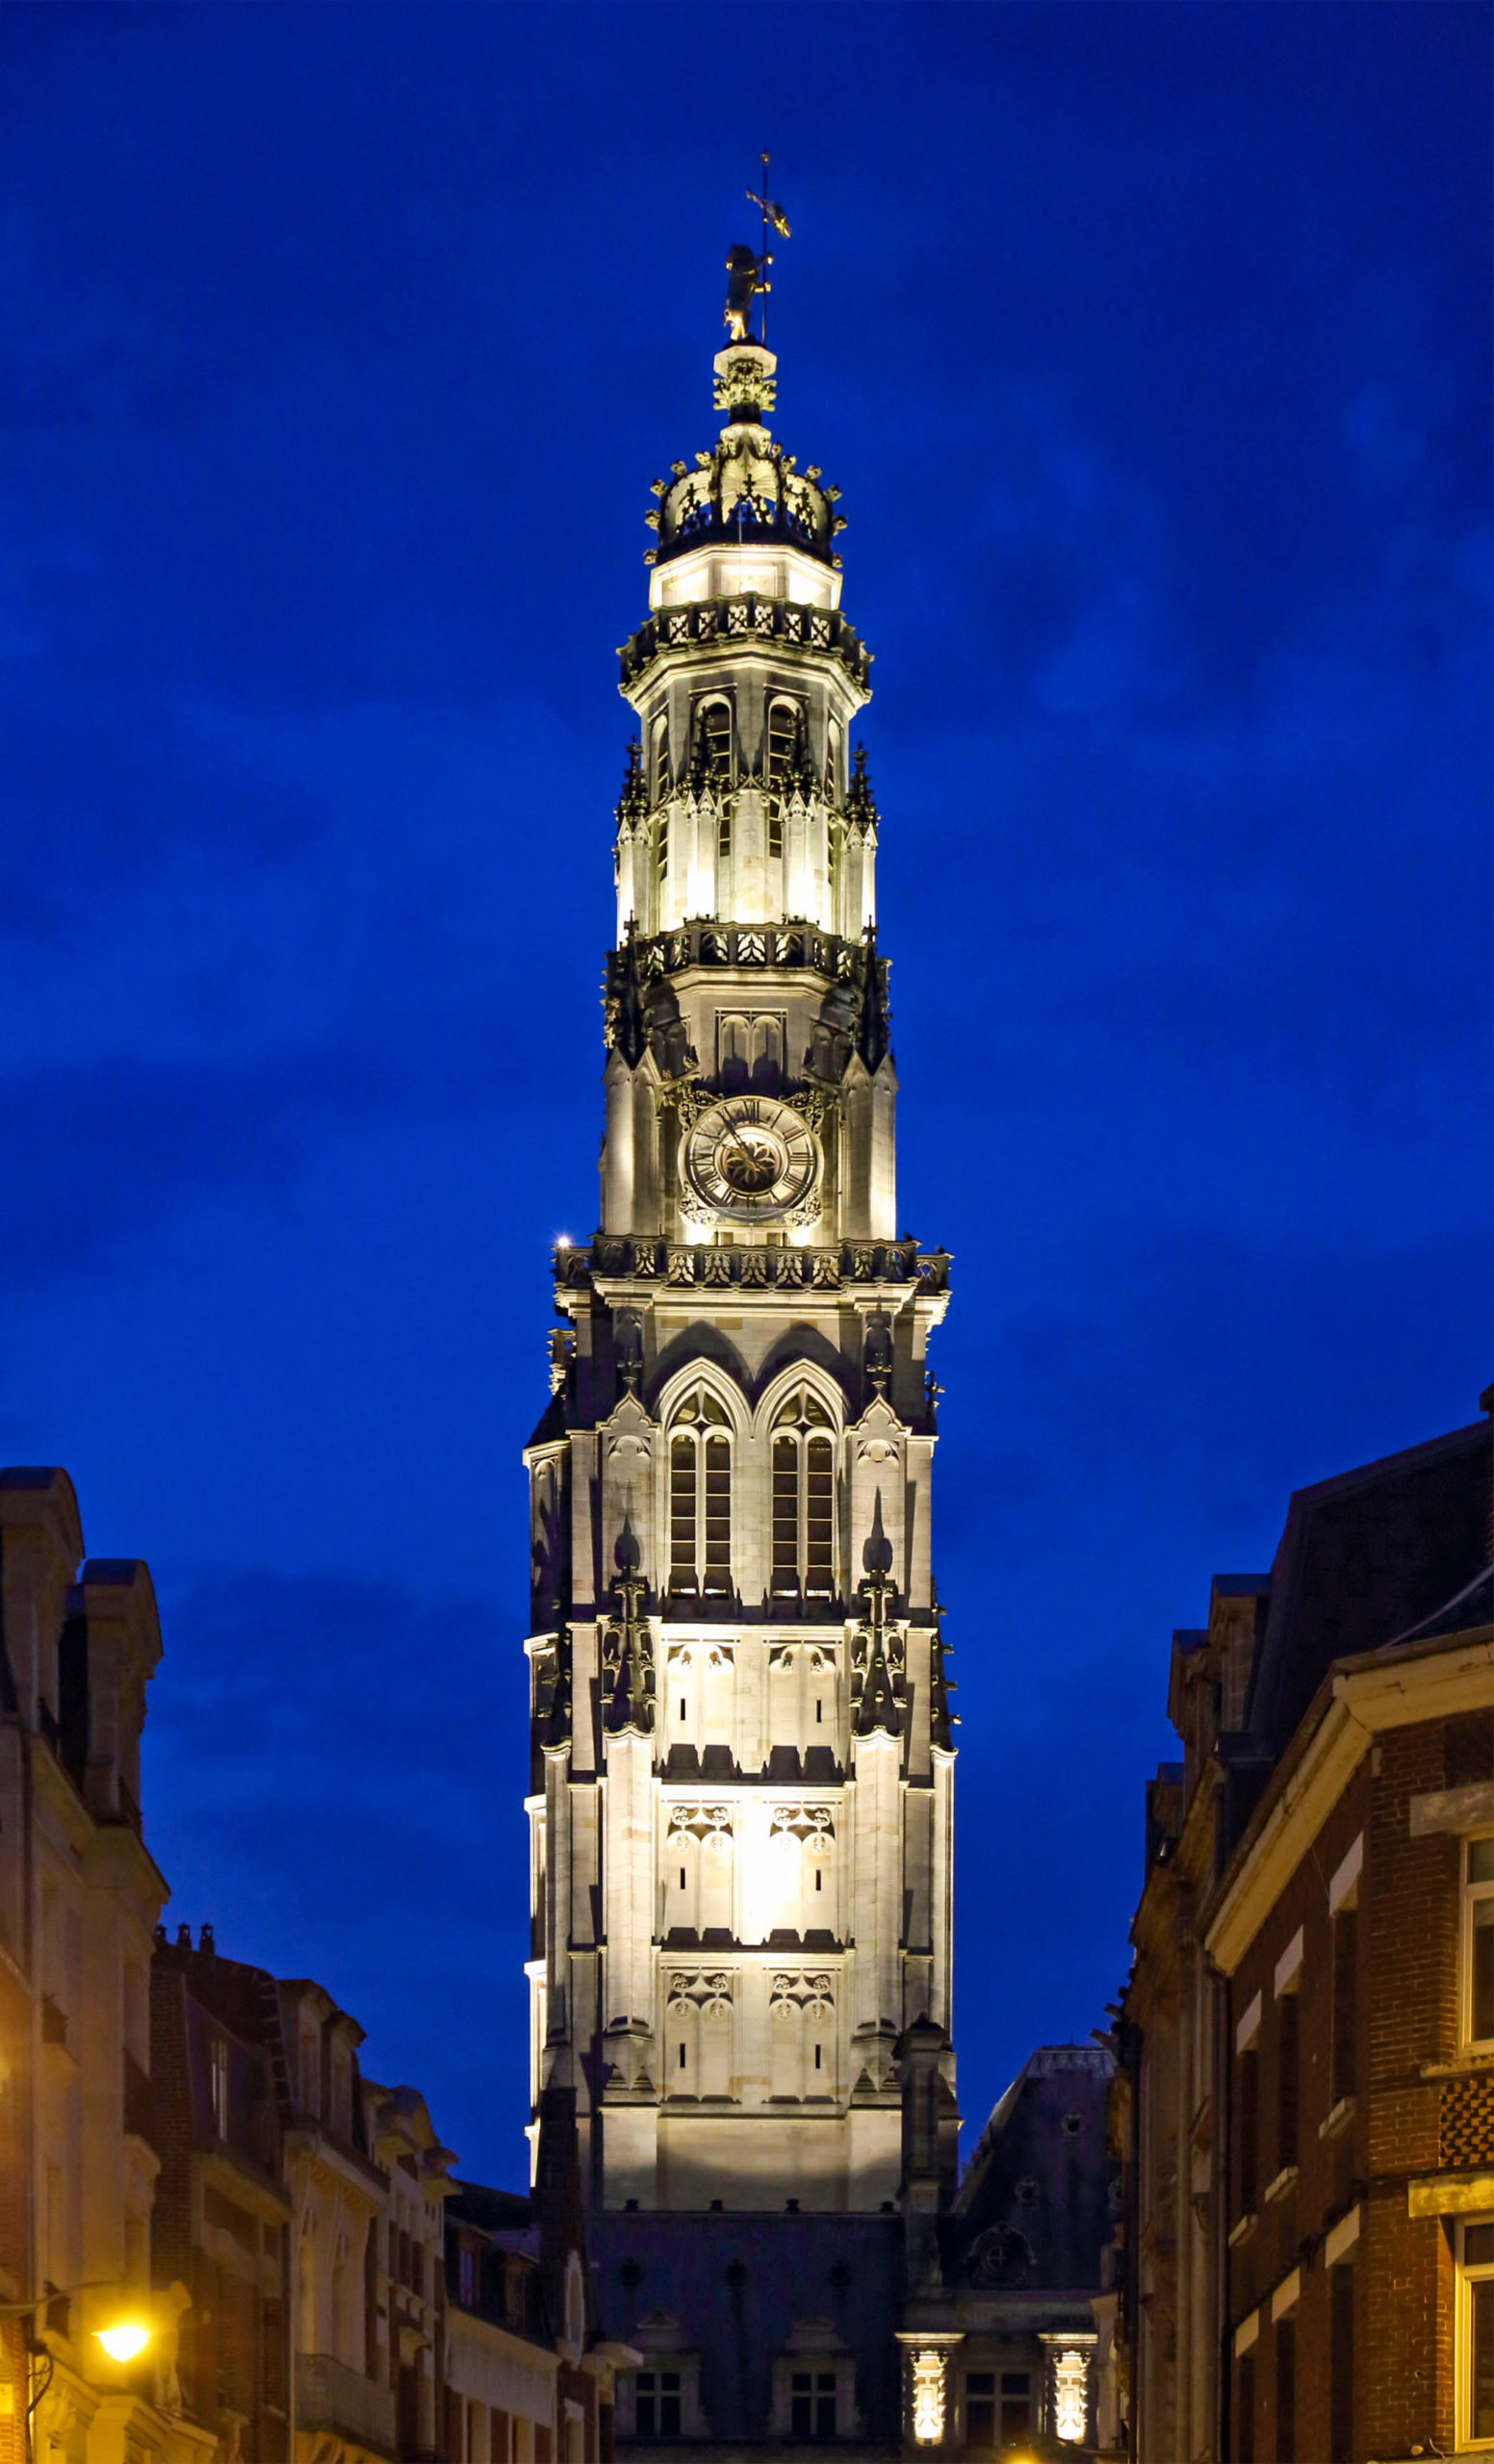 Arras Belfry © Marc Ryckaert - licence [CC BY-SA 4.0] from Wikimedia Commons